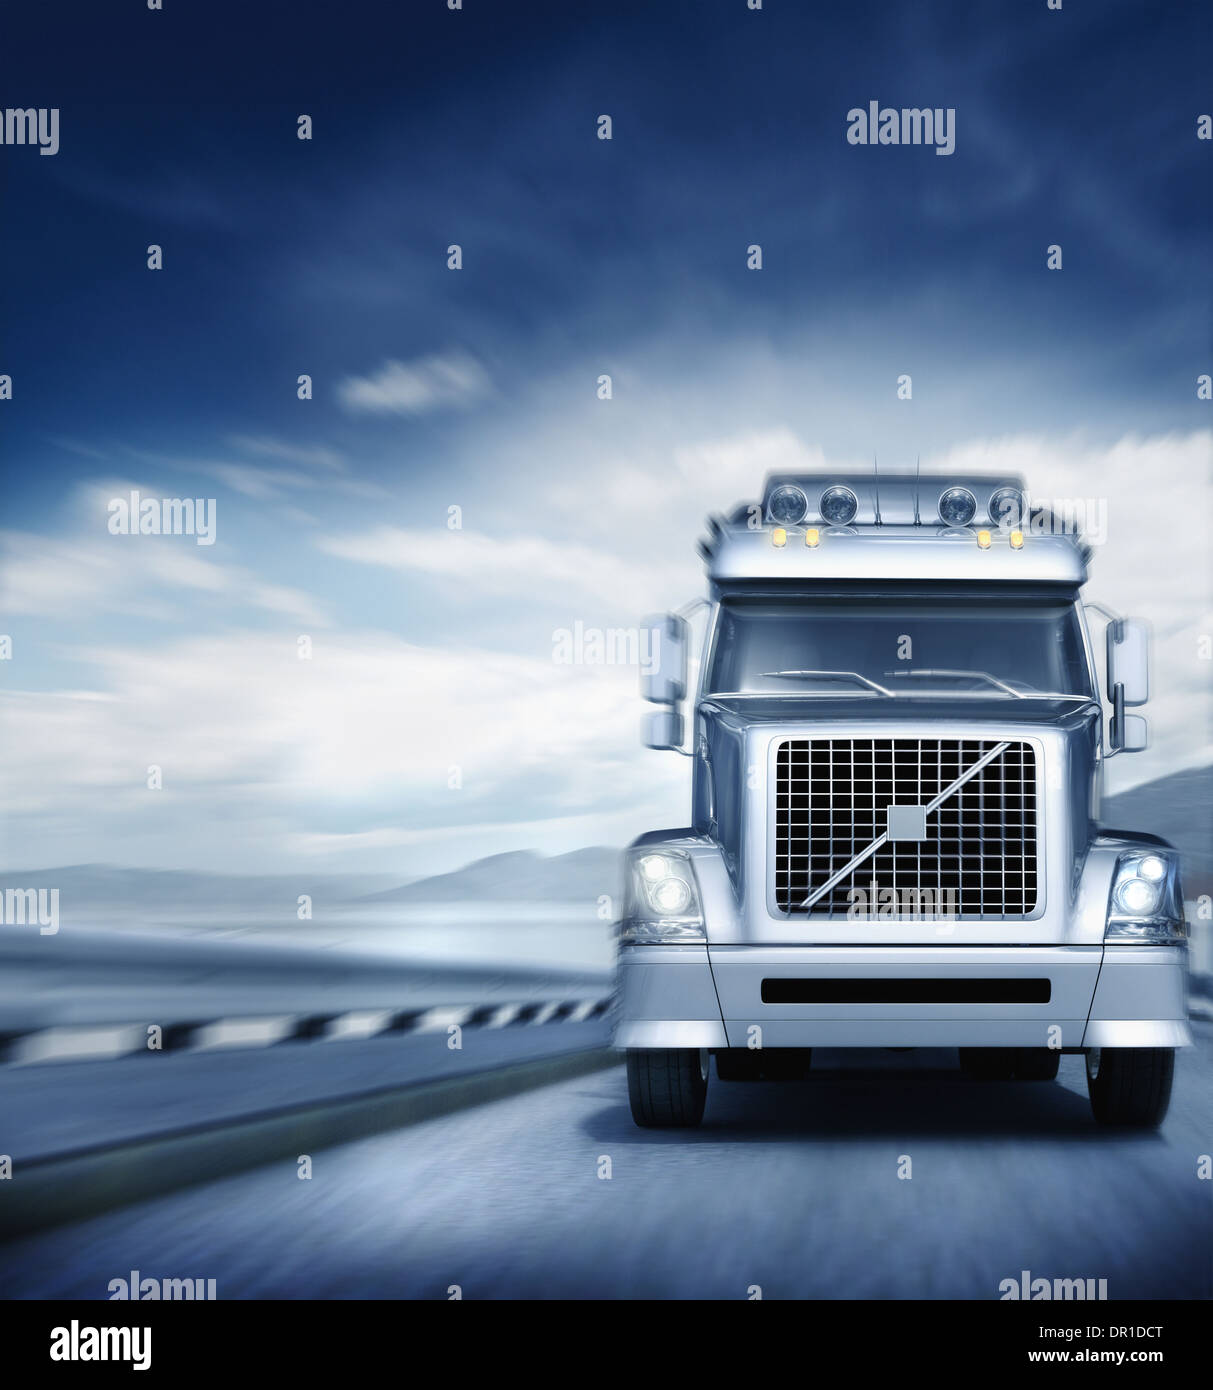 Blurred view of semi-truck driving on freeway Stock Photo